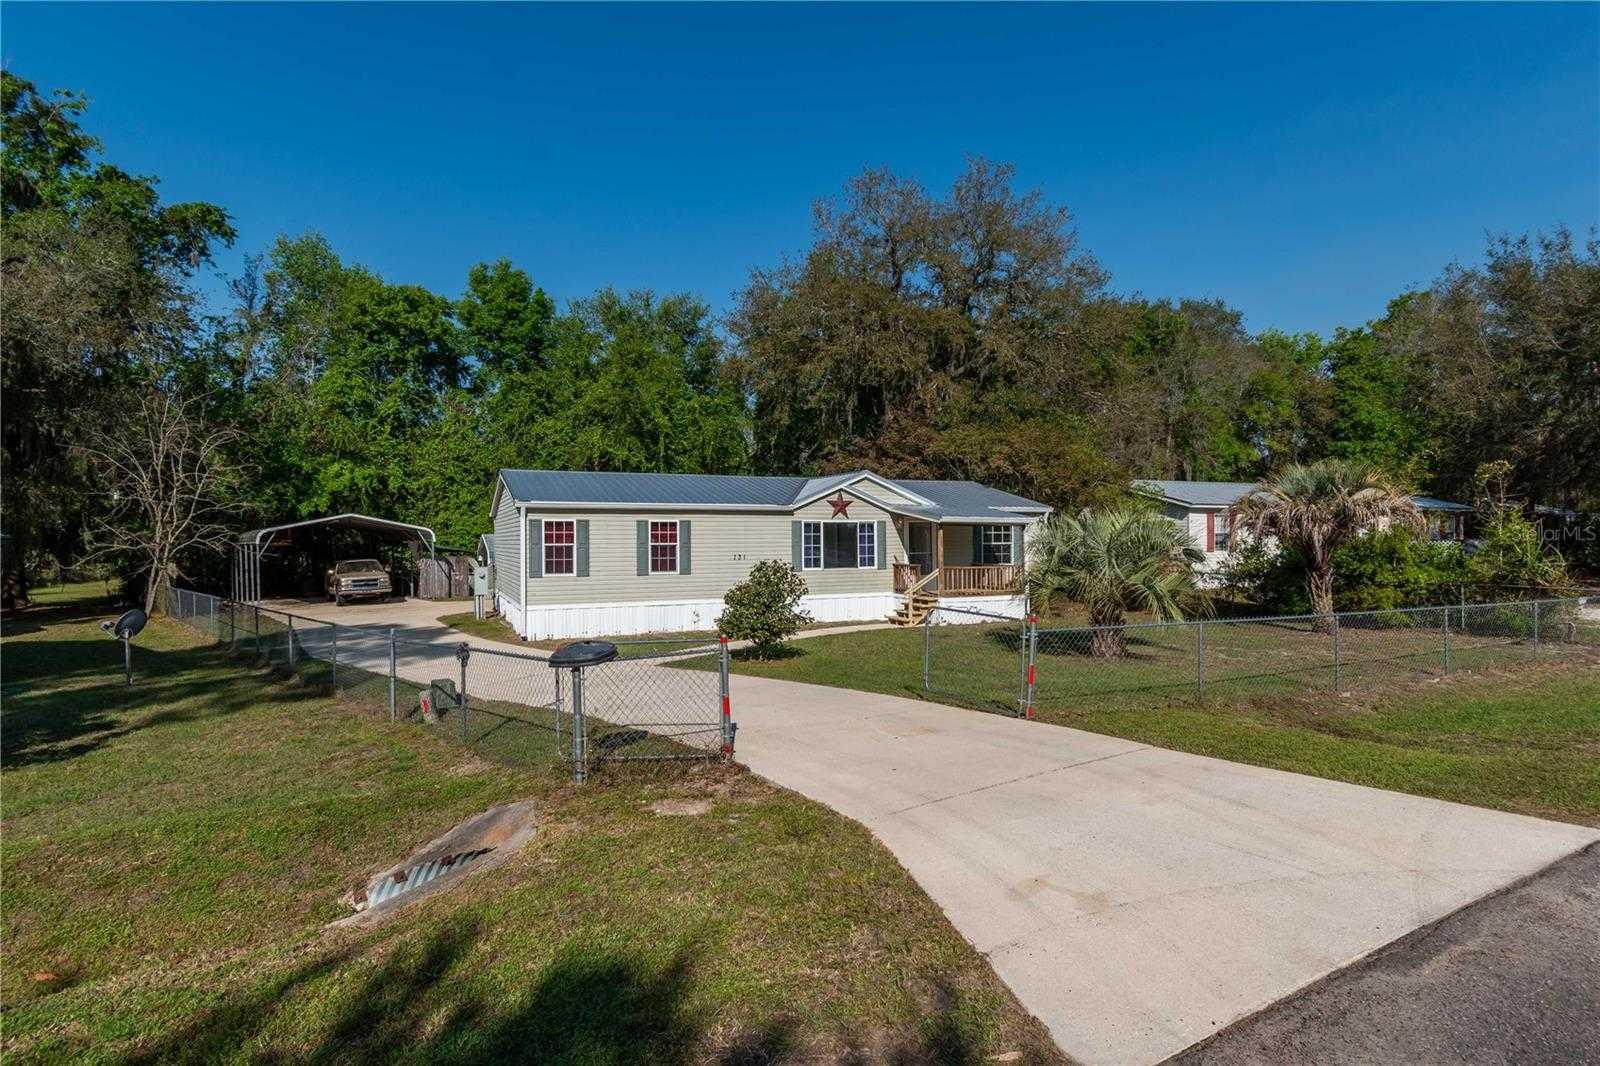 131 WINCHESTER, INTERLACHEN, Manufactured Home - Post 1977,  for sale, The Mount Dora Group 